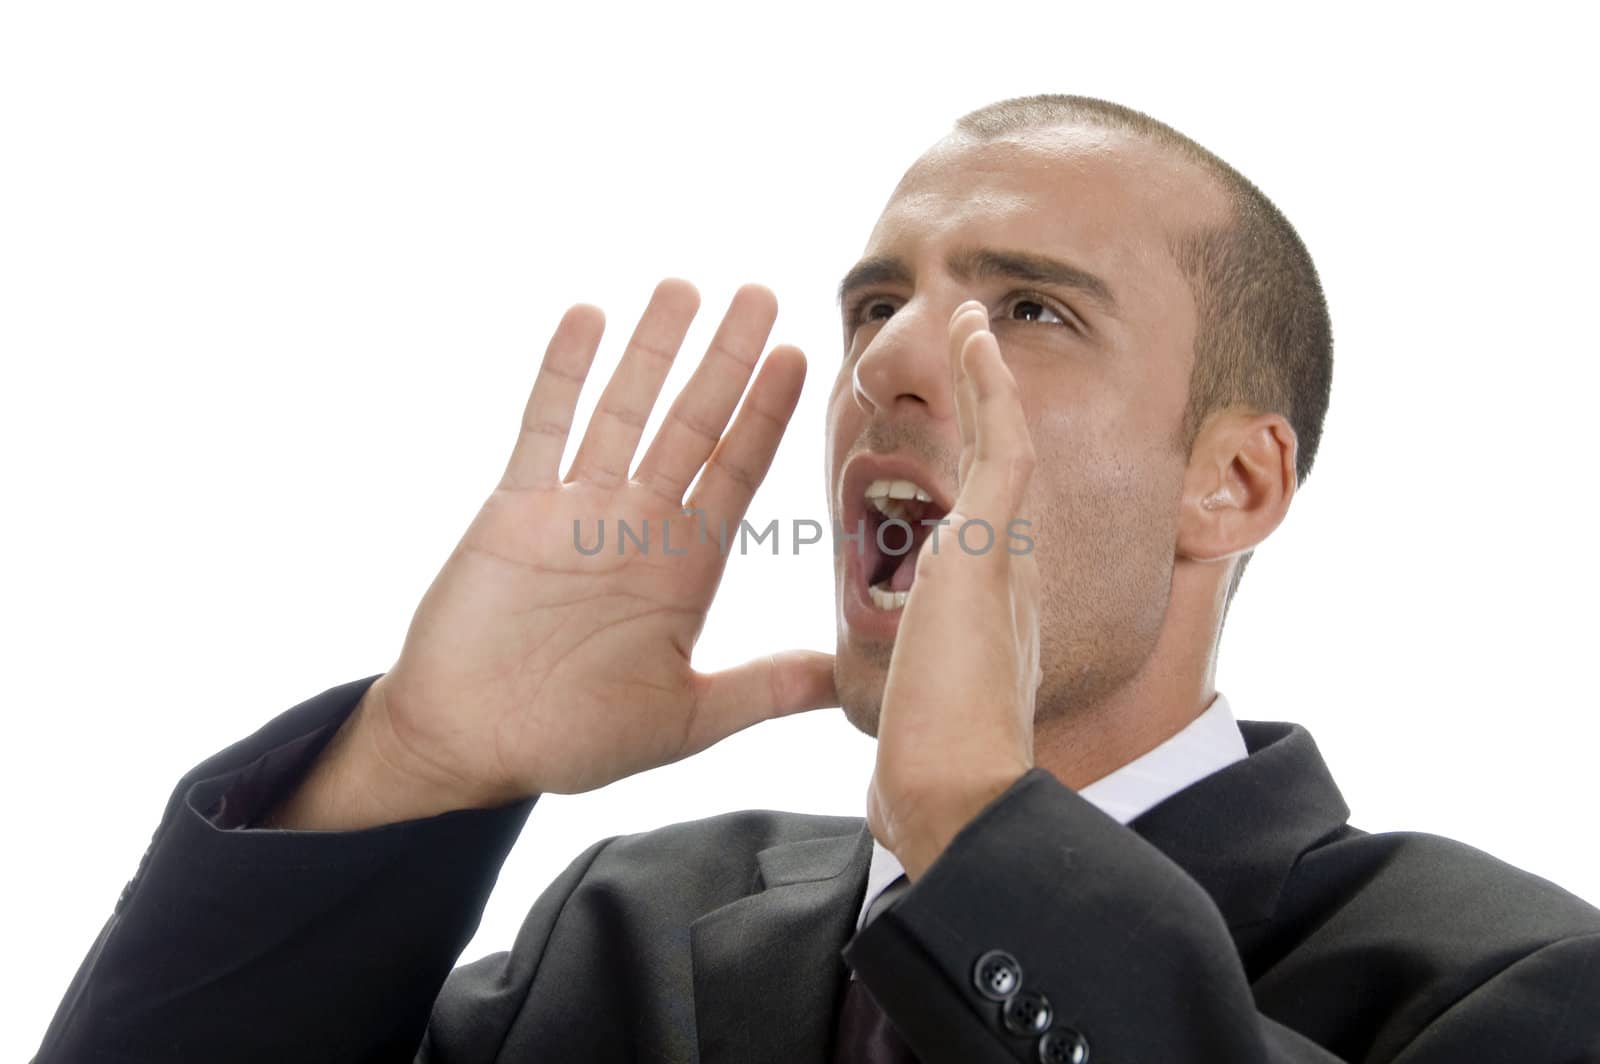 frustrated businessman shouting by imagerymajestic